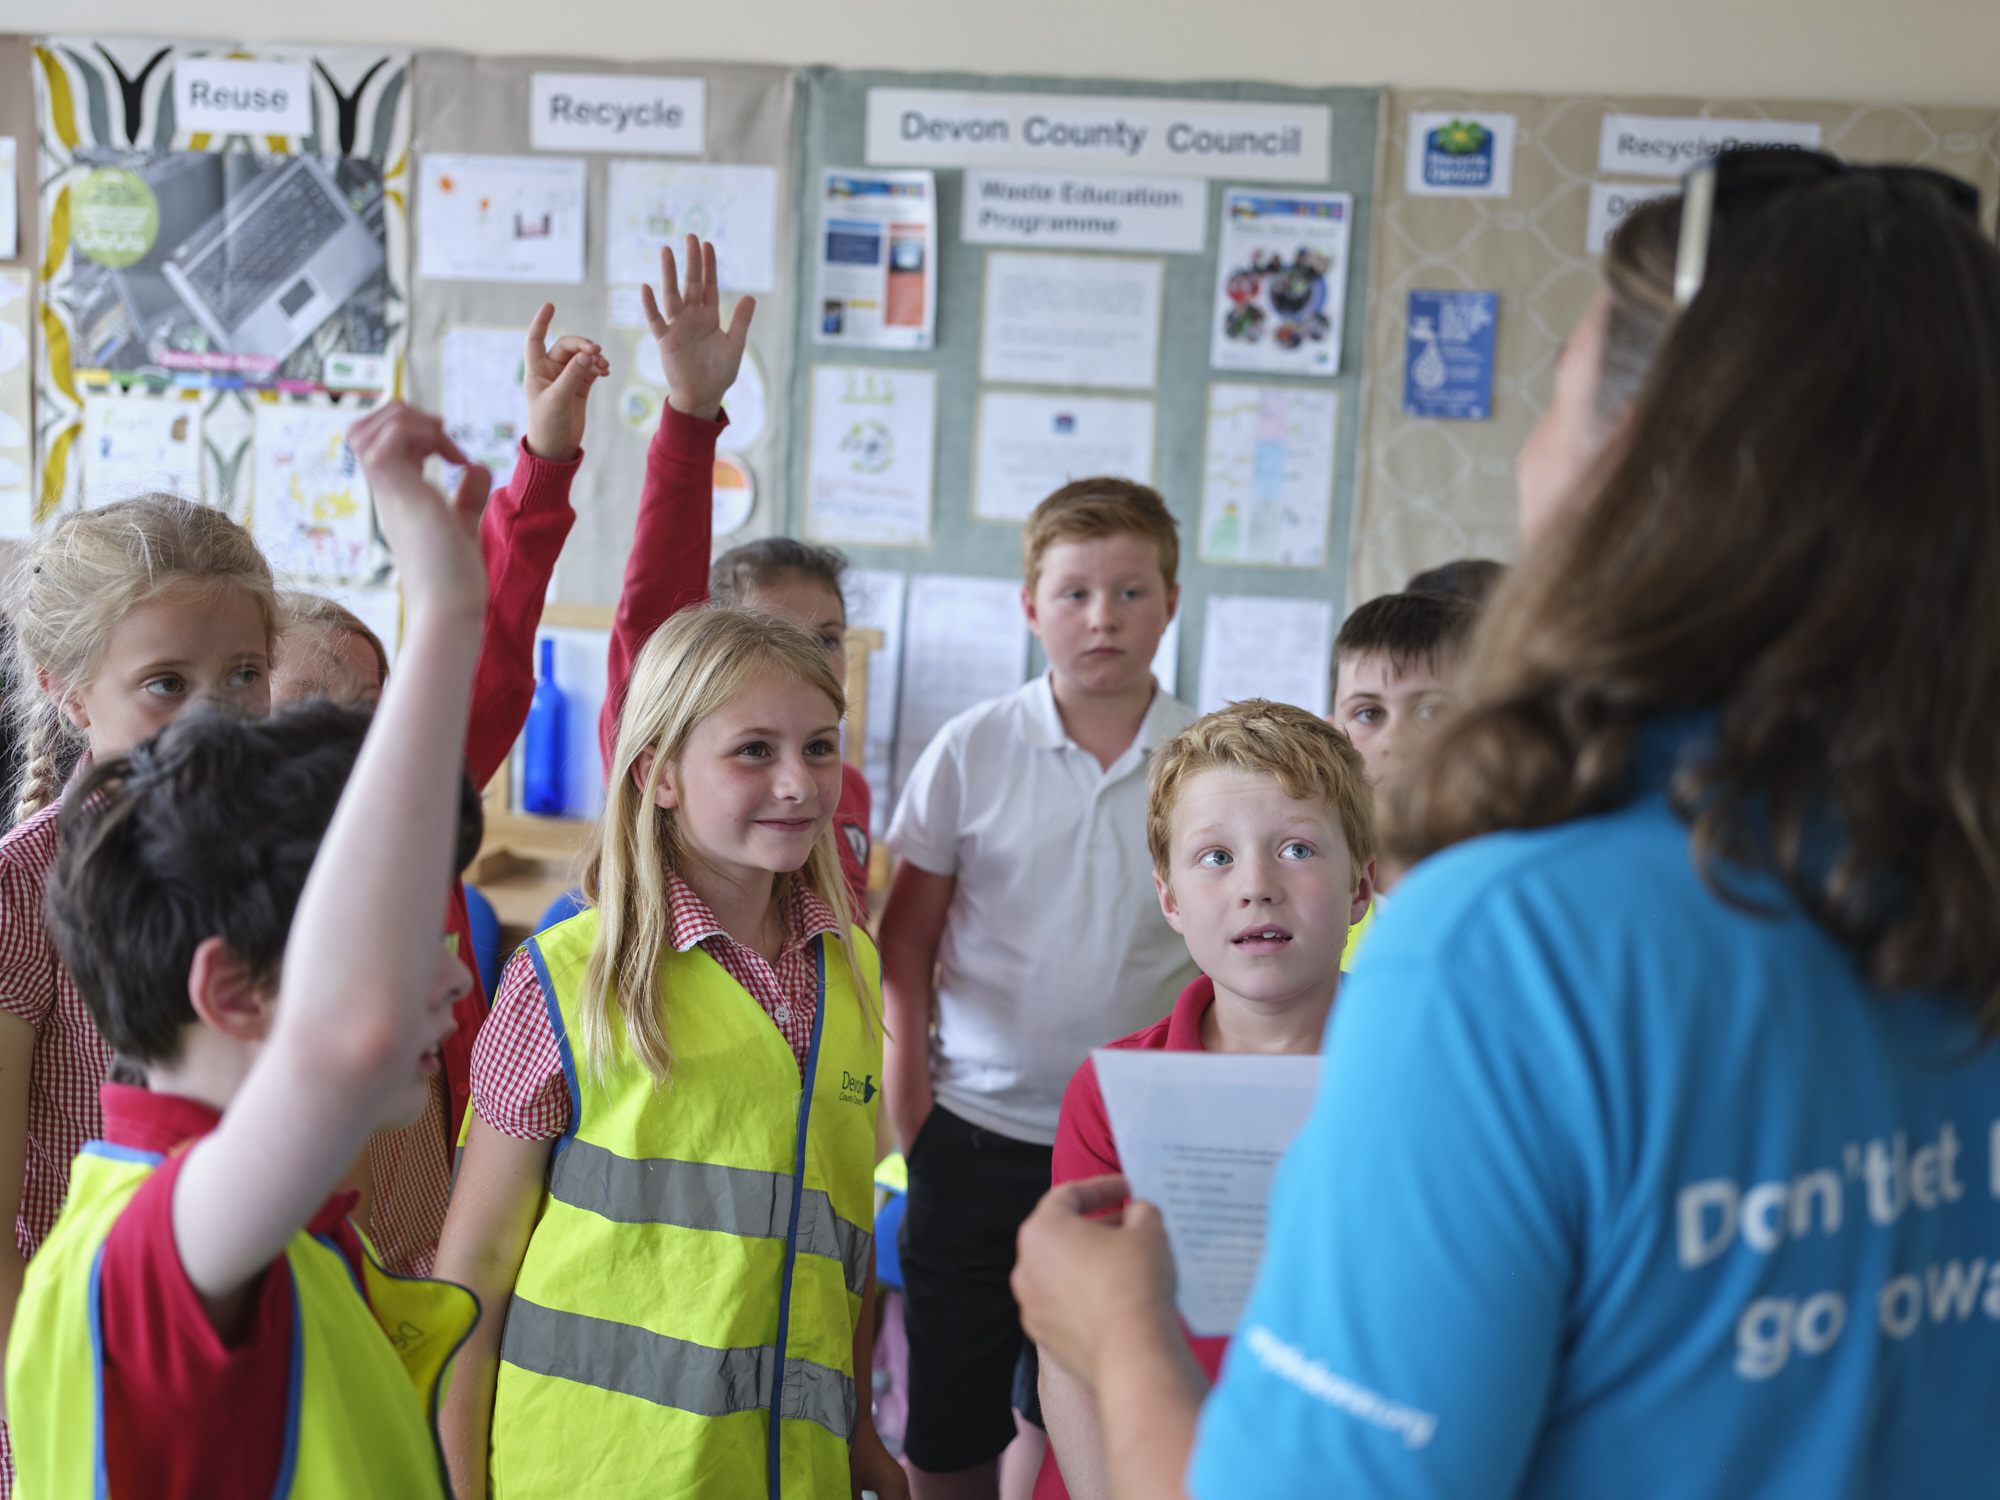 Hands up for learning about waste!